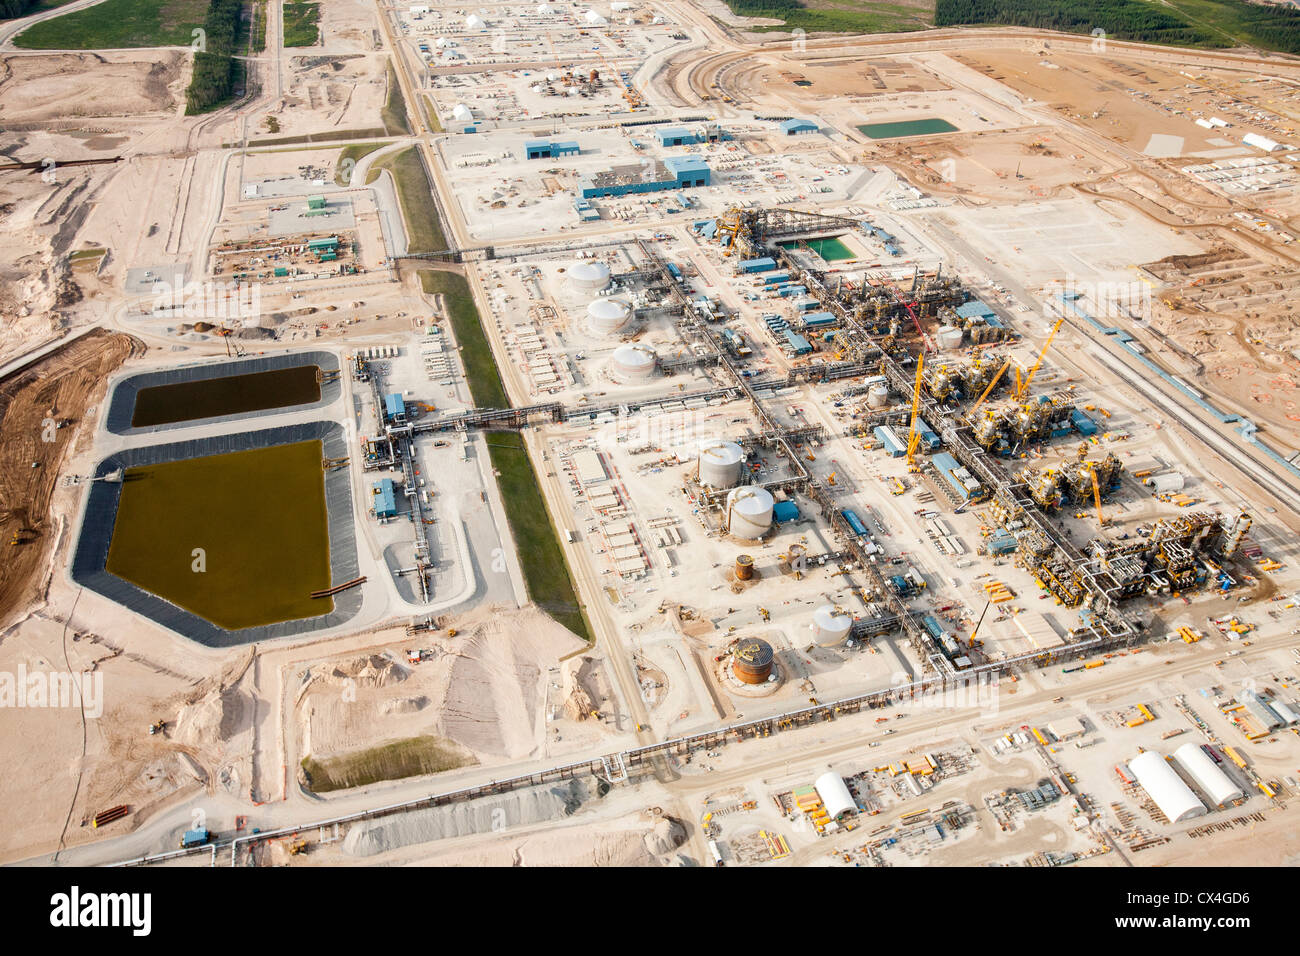 A brand new Tar sands plant being constructed north of Fort McMurray, Alberta, Canada. Stock Photo